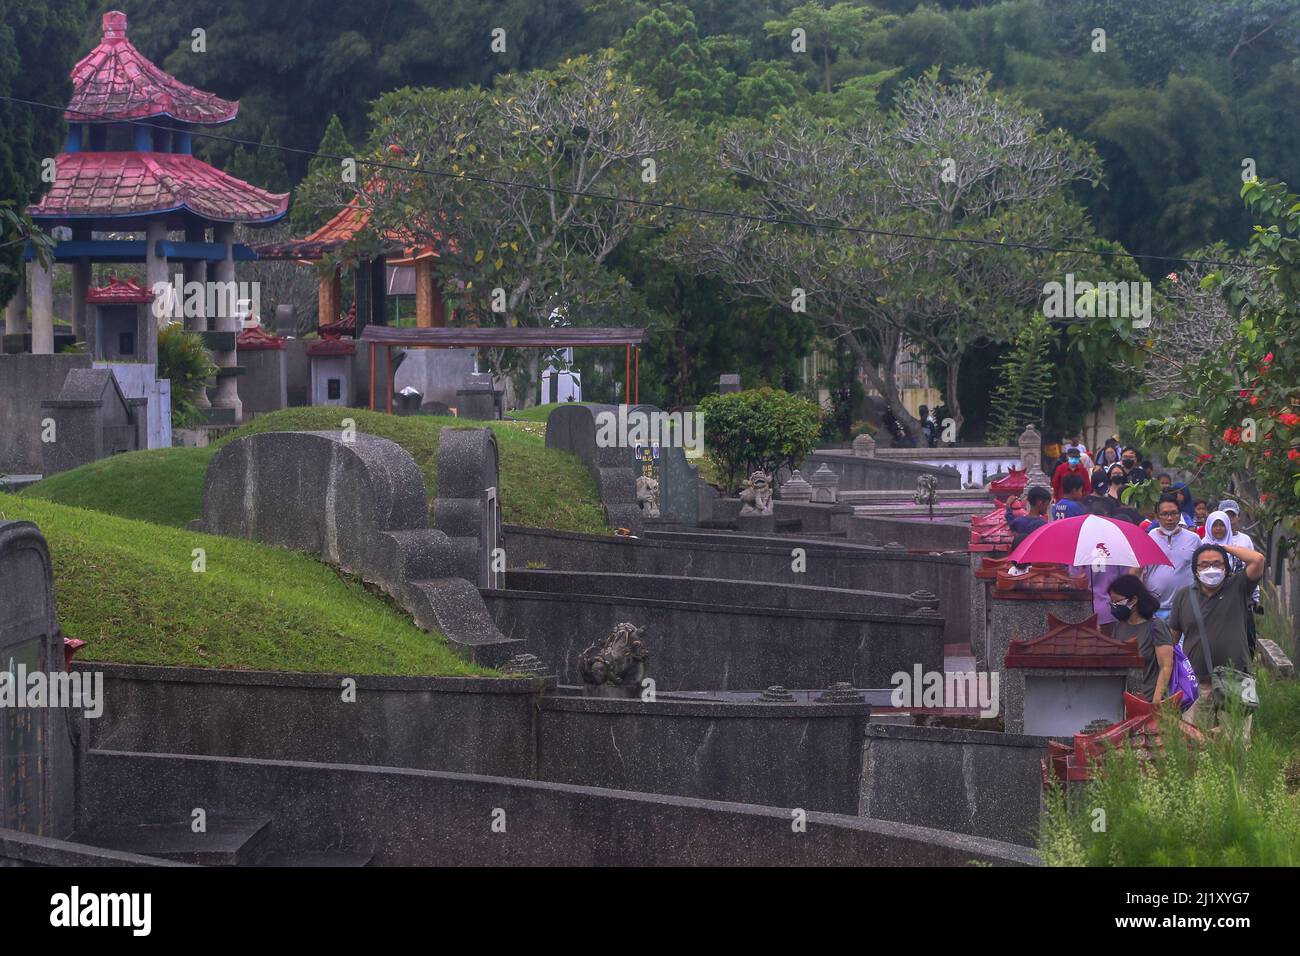 Indonesian ethnic Chinese gather in a cemetery to visit their loved ones during the Cheng Beng or Qingming Festival, also known as Tomb Sweeping Day, at a Chinese cemetery in Bogor, West Java, Indonesia on March 27, 2021. The Qingming Festival is an annual Chinese ethnic ritual to remember, honour, and pilgrimage to the ancestors grave according to Confucianism. Everyone prays in front of the ancestors, sweeps the tomb and prays with incense, money, paper prayers and various accessories, as an offering to the ancestors. (Photo by Andi M Ridwan/INA Photo Agency/Sipa USA) Stock Photo